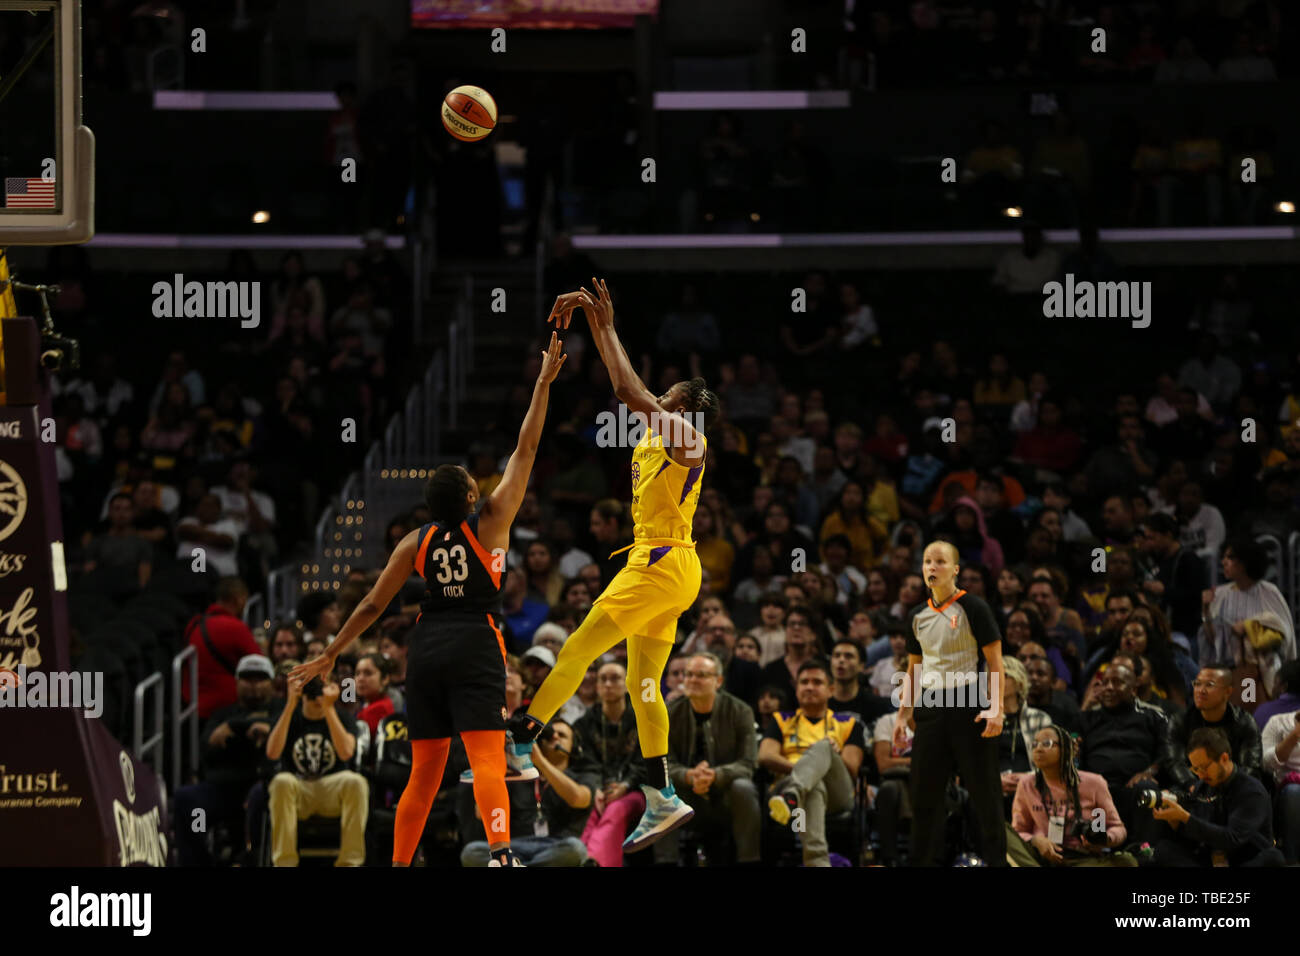 Los Angeles Sparks forward Nneka Ogwumike #30 from deep during the Connecticut Sun vs Los Angeles Sparks game at Staples Center in Los Angeles, Ca on May 31, 2019. (Photo by Jevone Moore) Stock Photo